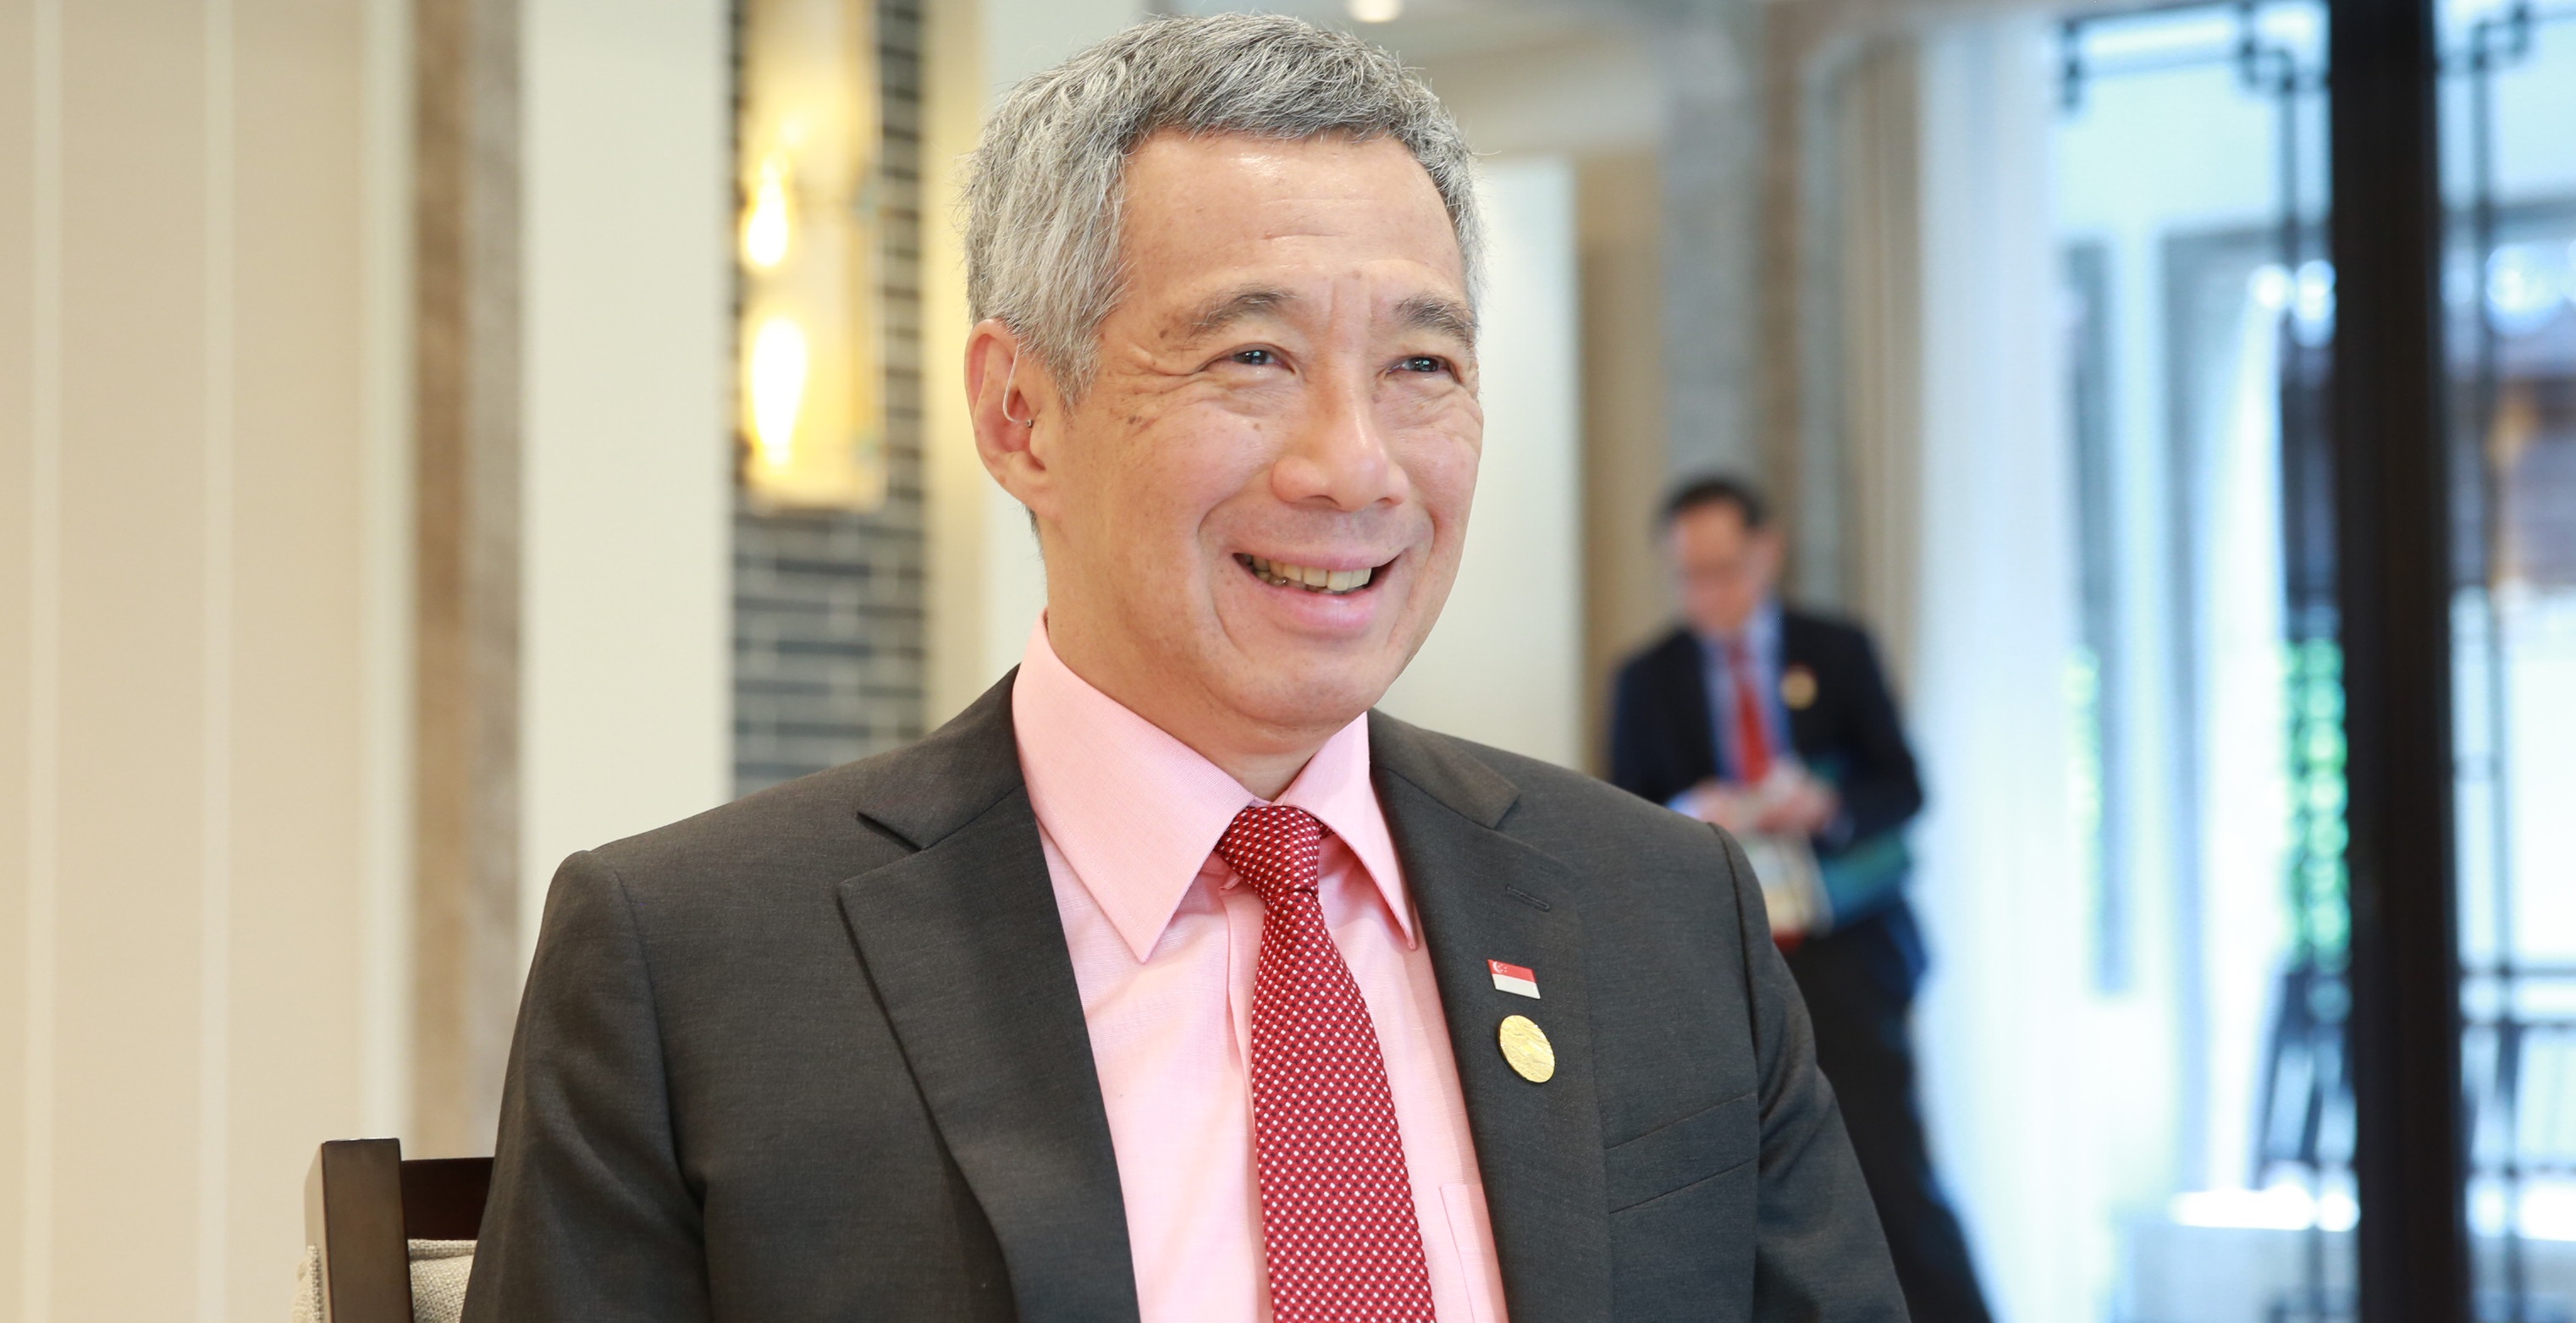 Transcript of PM Lee Hsien Loong's interview with Caijing 